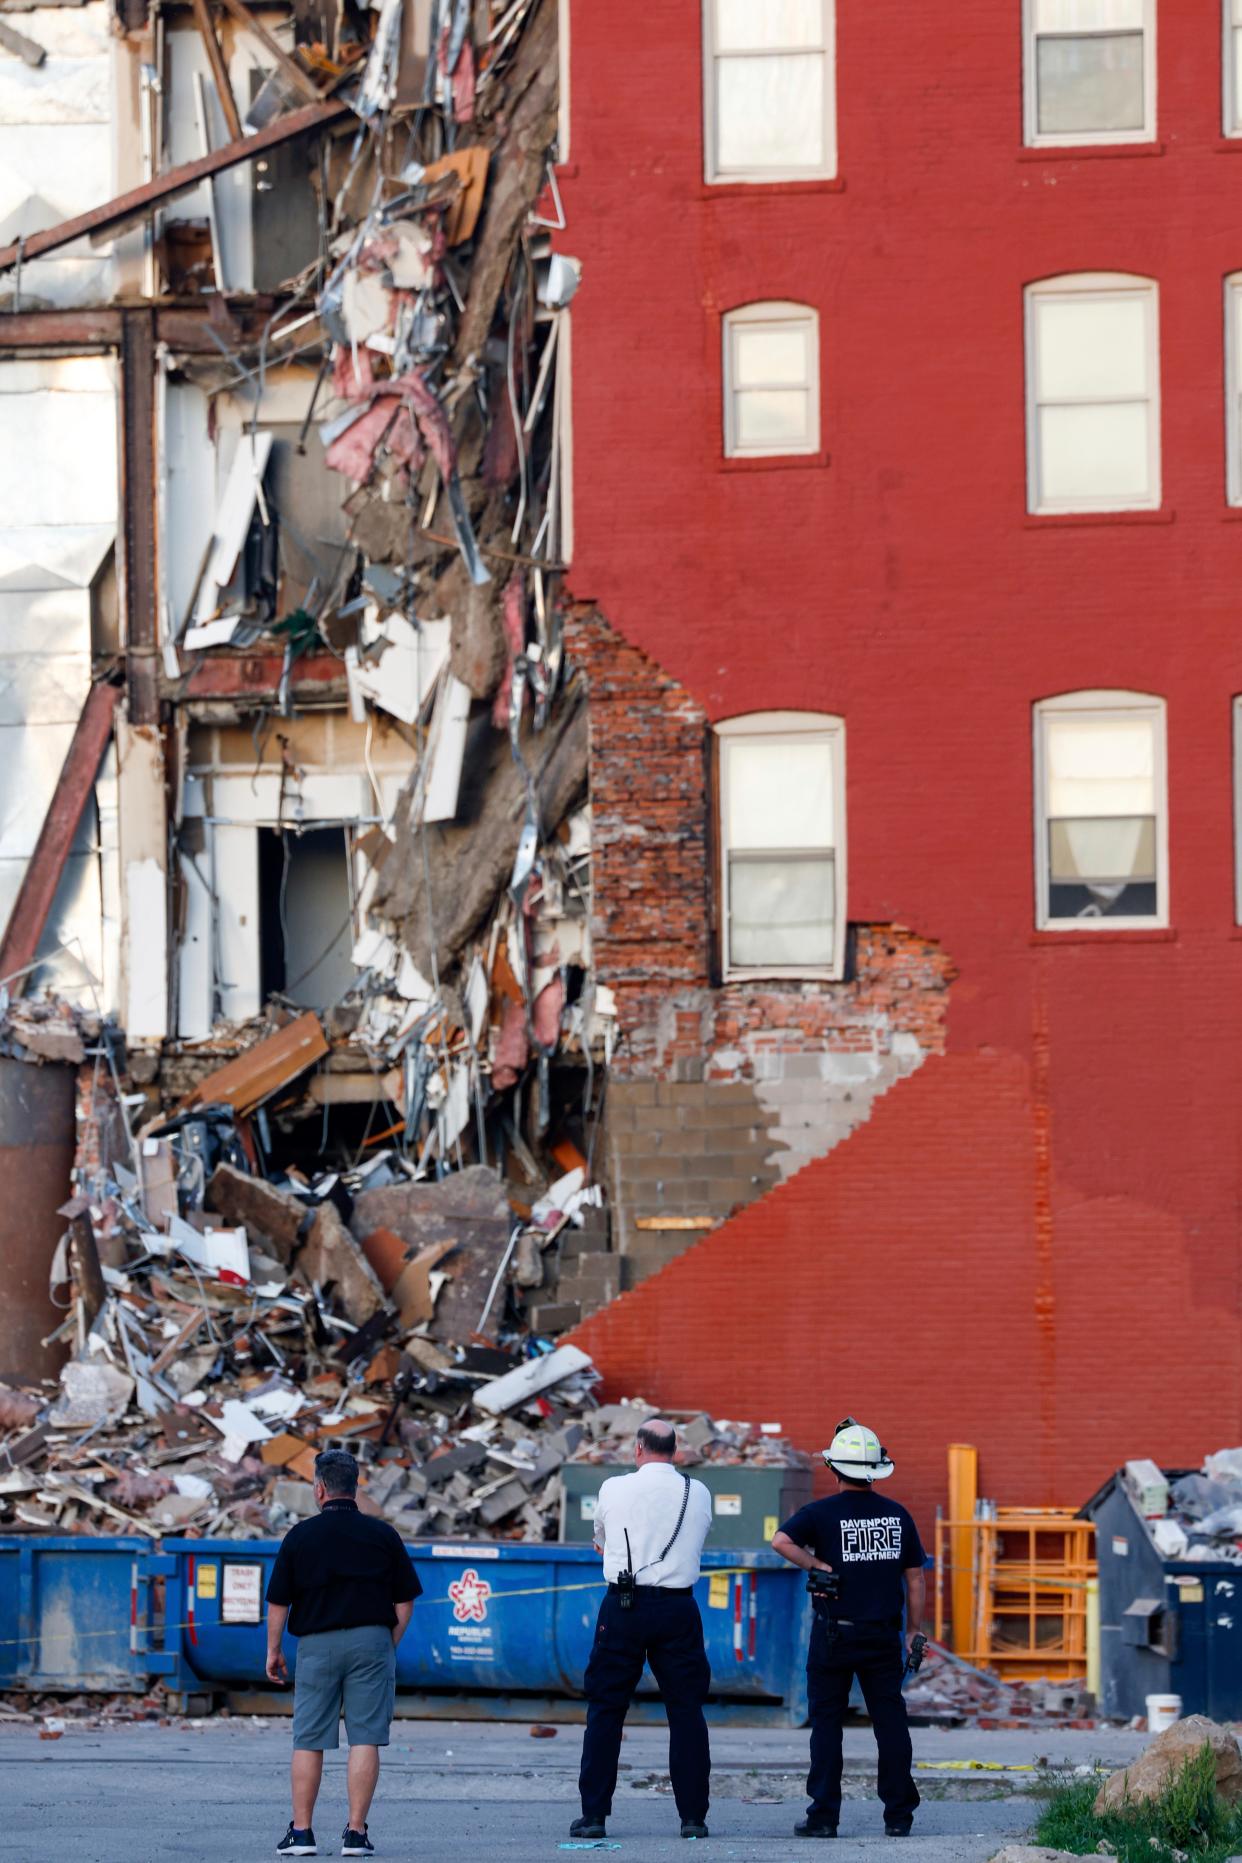 The facade of the red brick building was ripped off, exposing the apartment units inside (AP)